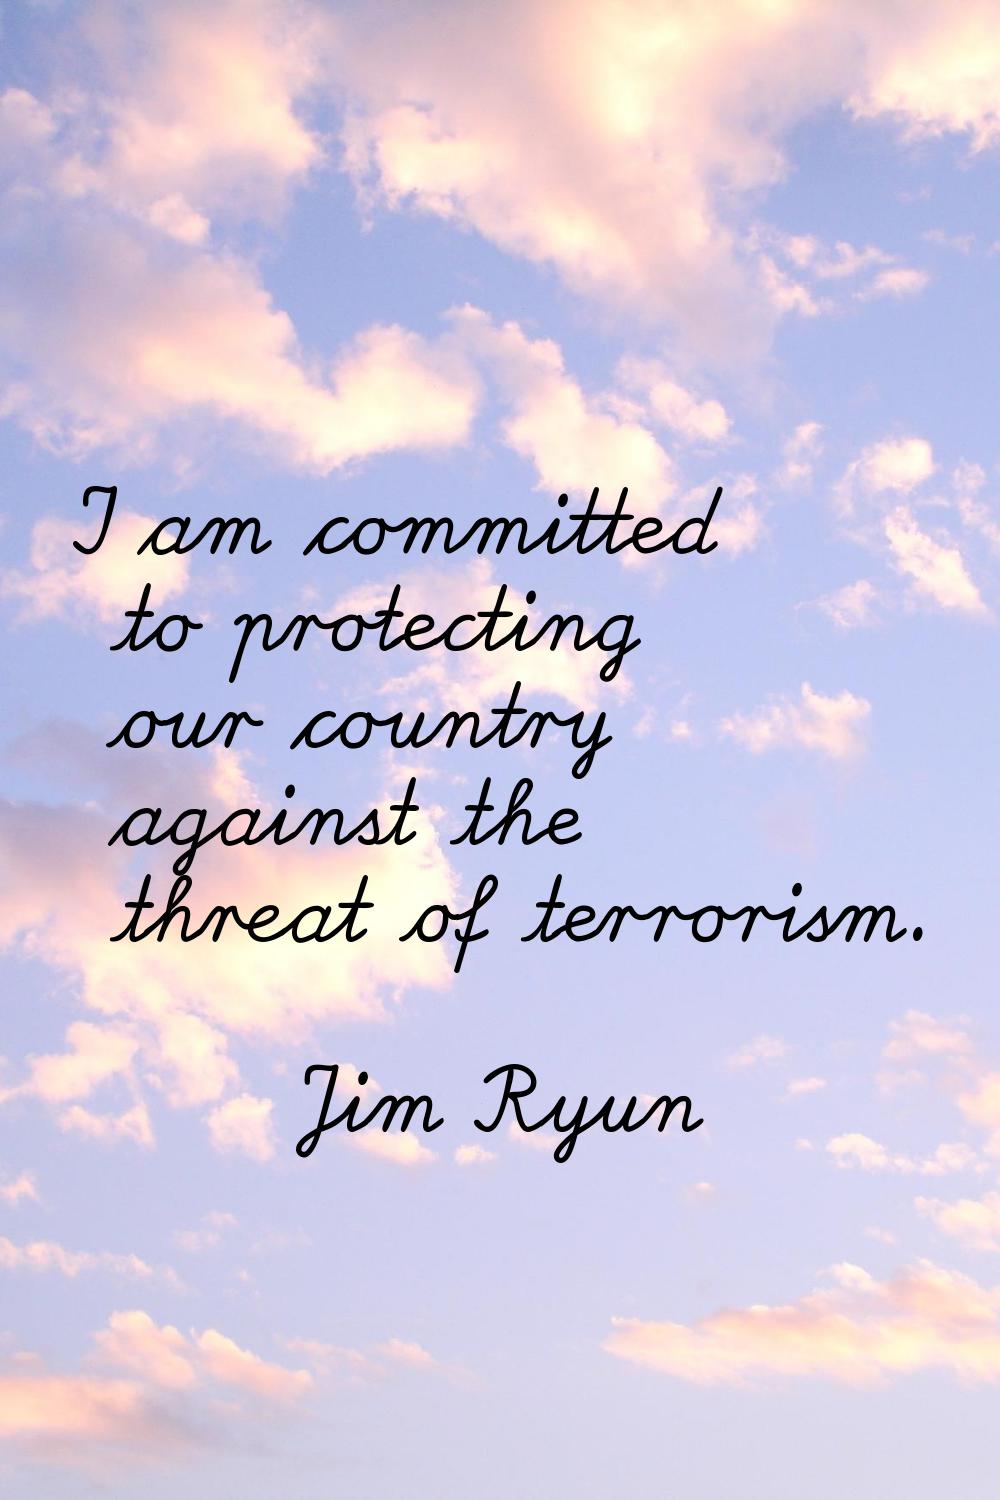 I am committed to protecting our country against the threat of terrorism.